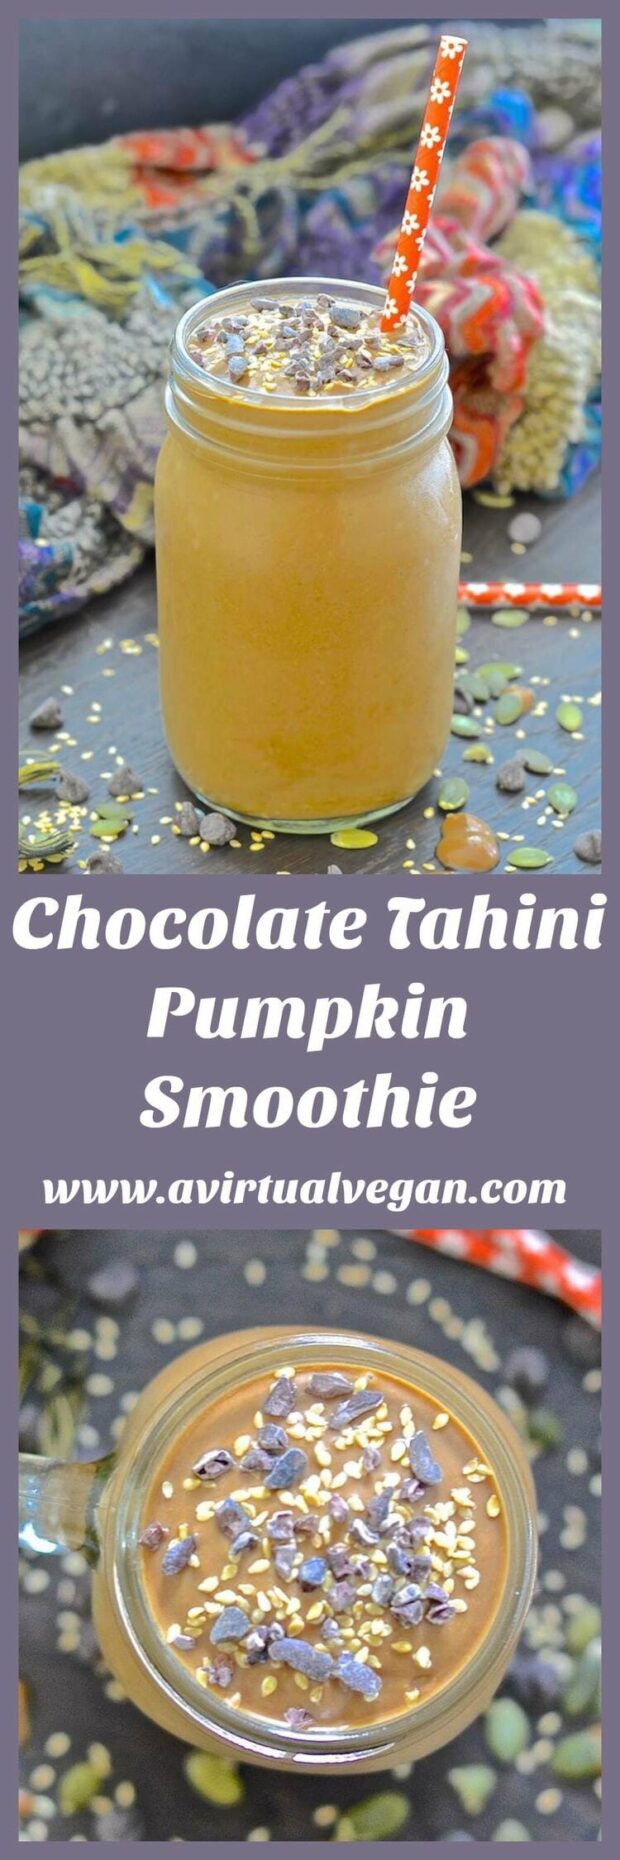 15 Delicious Smoothies To Make This Fall (Part 1) - Healthy Fall Smoothie Recipes, Healthy Fall Smoothie, fall Smoothie Recipes, fall Smoothie